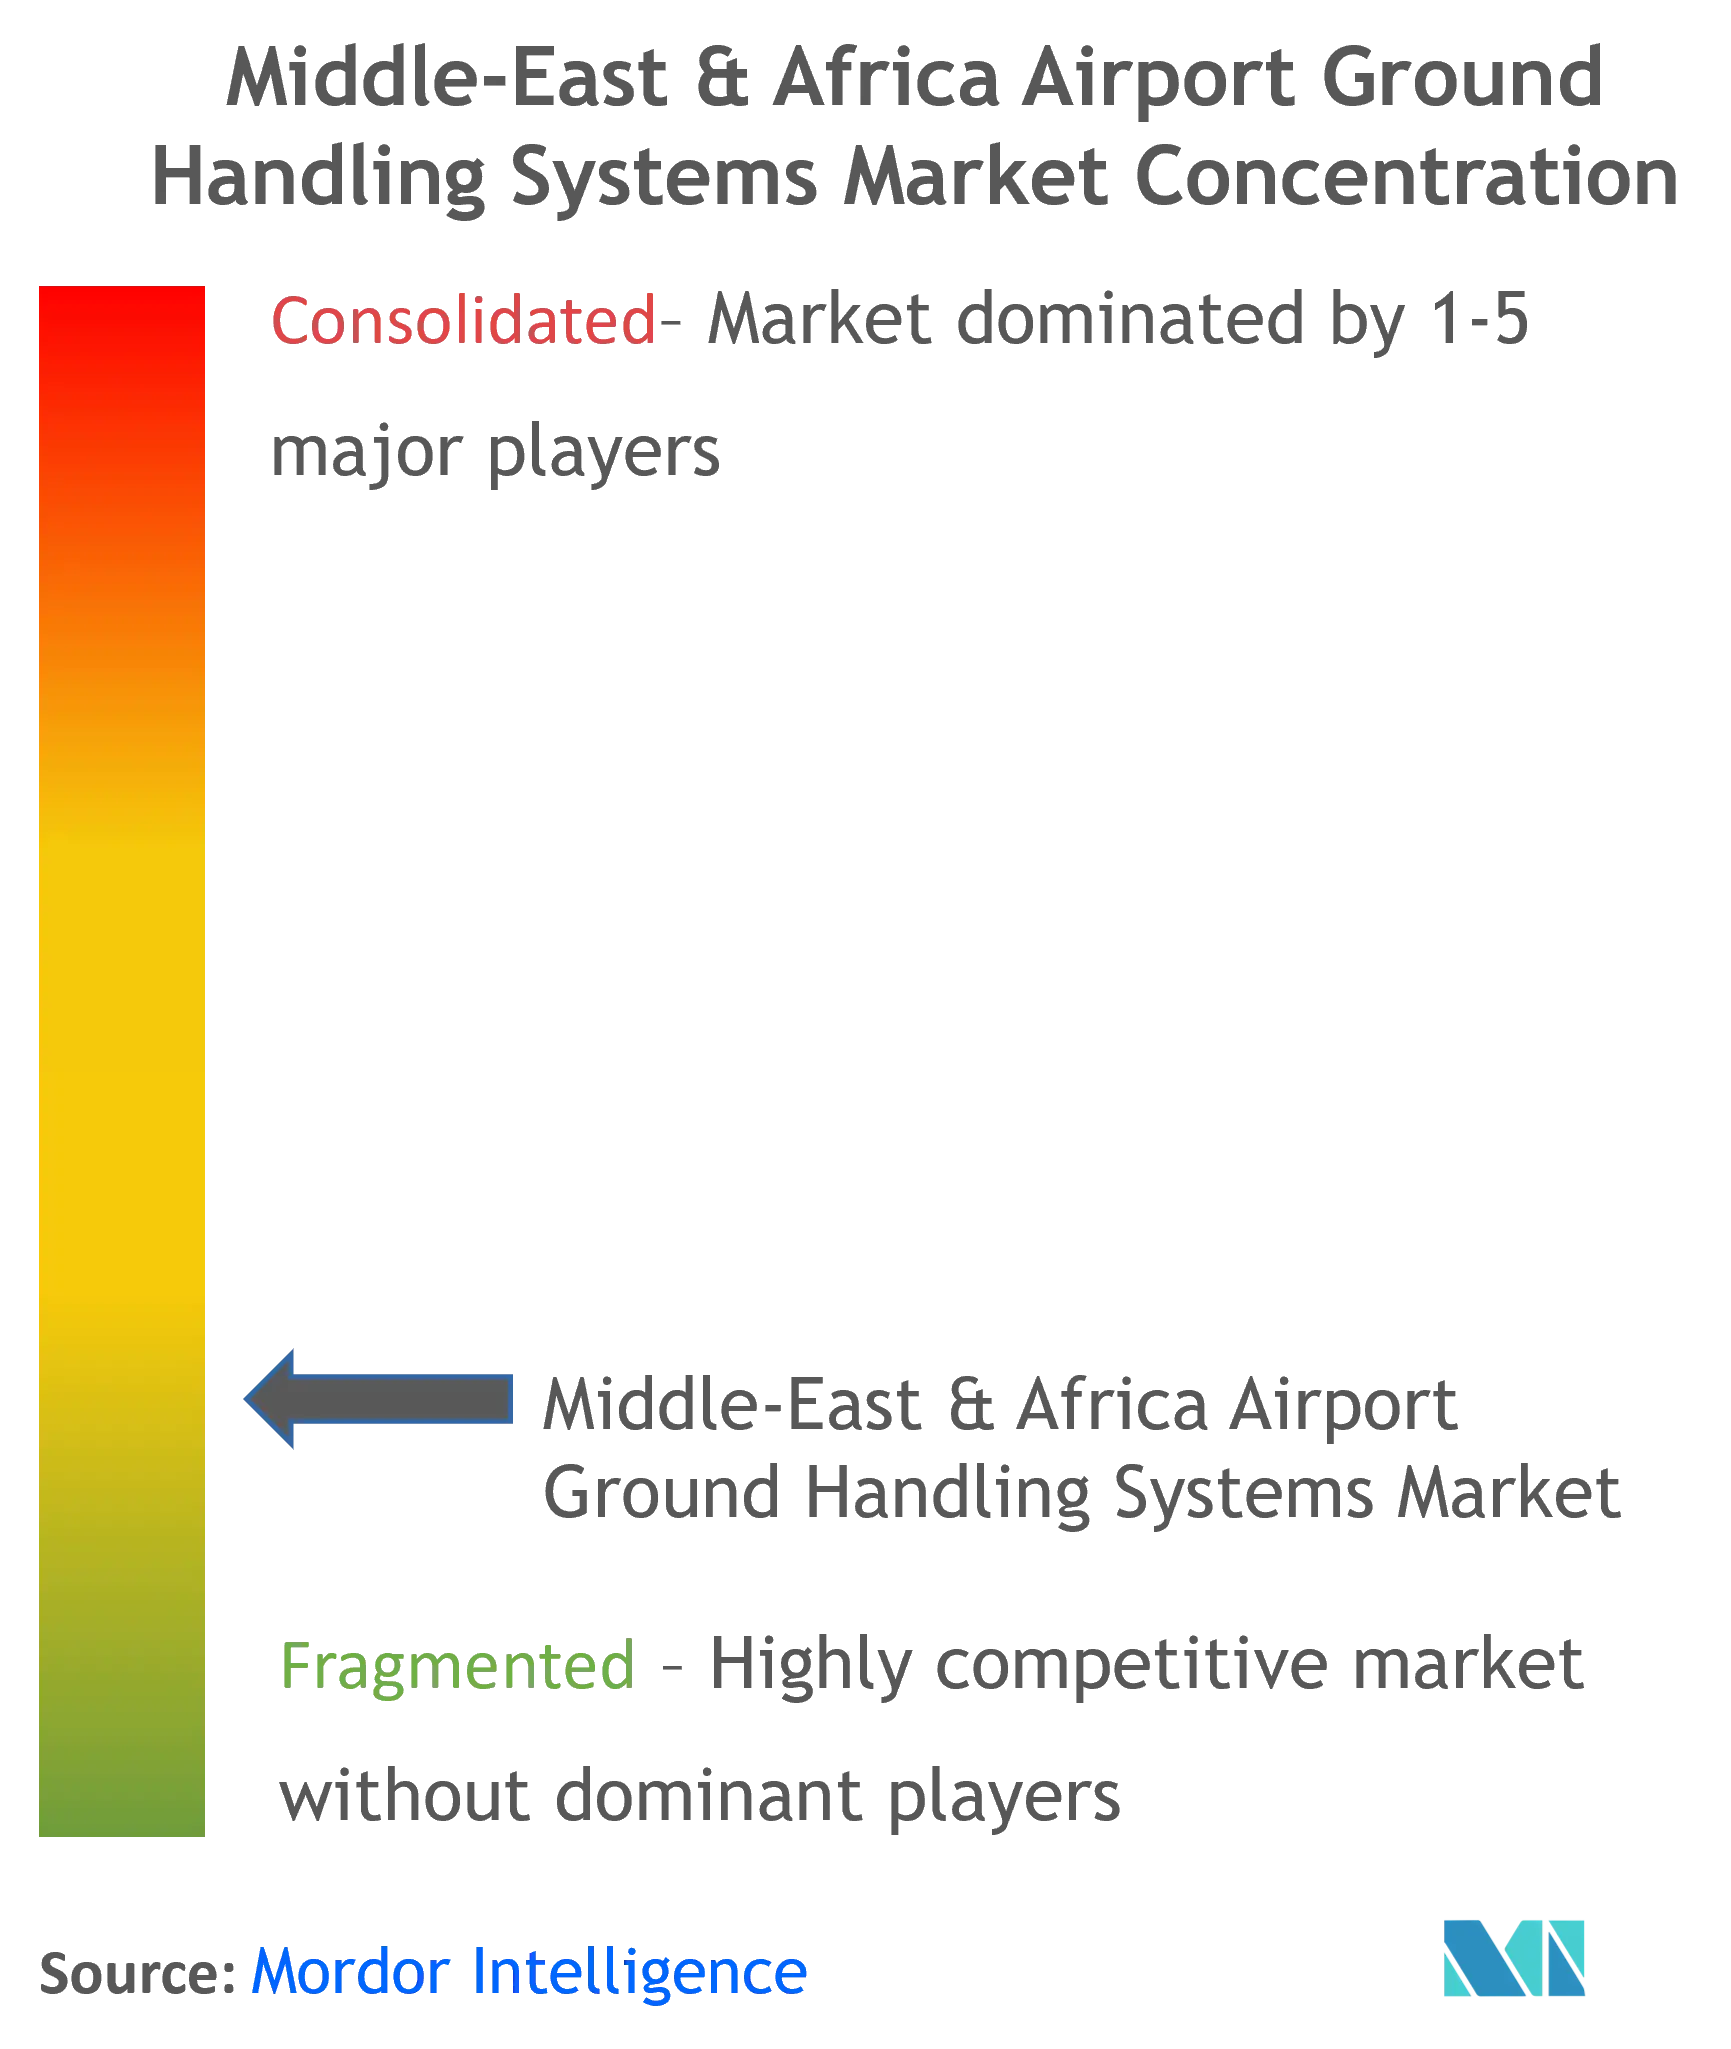 Middle-East And Africa Airport Ground Handling Systems Market Concentration